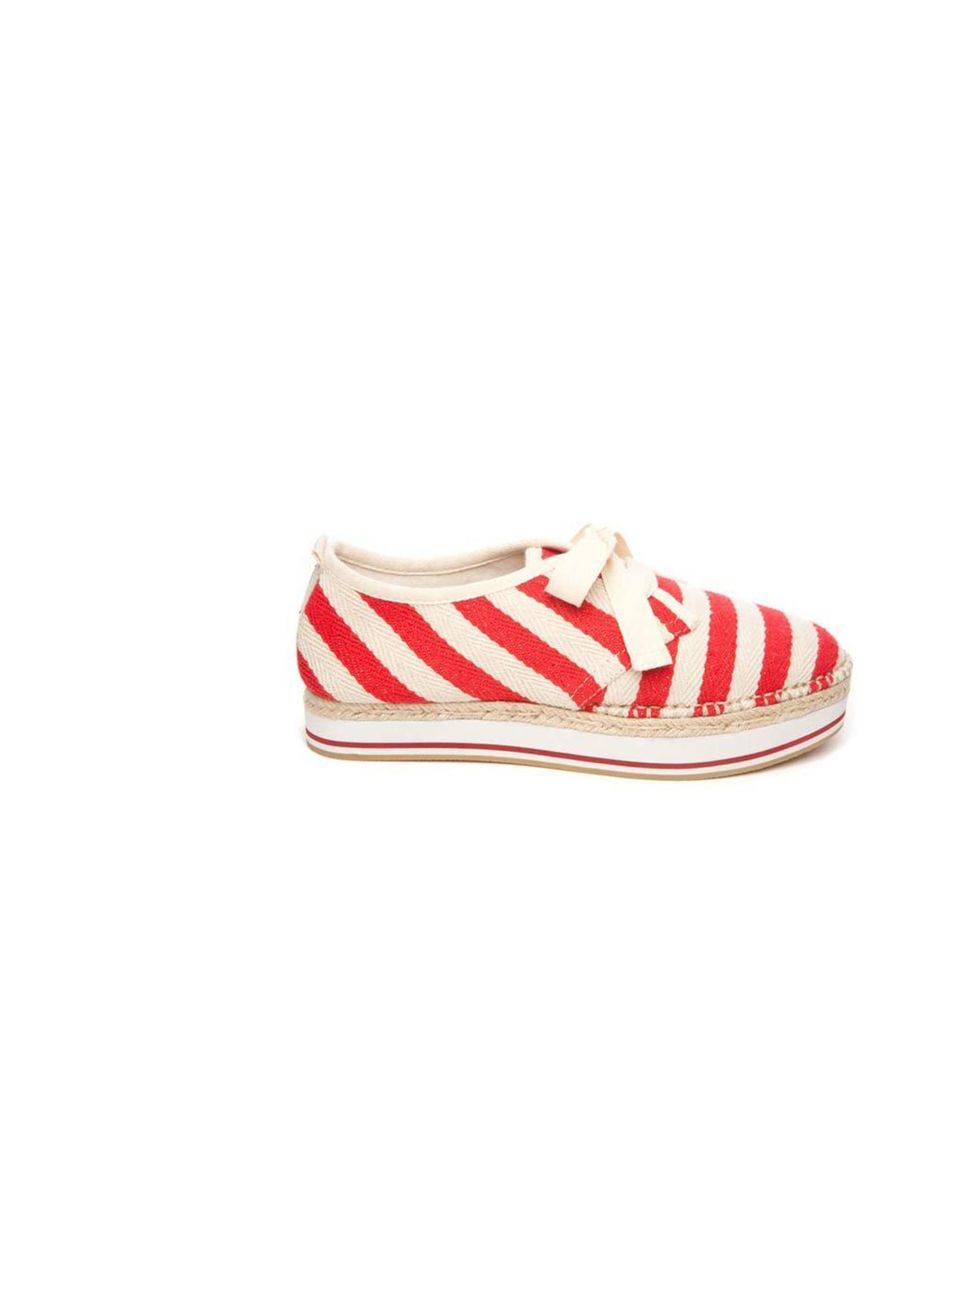 <p>These boat shoes are great for summer; the candy stripes will add a punch of colour to any outfit, and the flatform sole is right on trend... <a href="http://www.bimbaylola.com/shoponline/product.php?id_product=5740&id_category=305?lang=en">Bimba & Lol